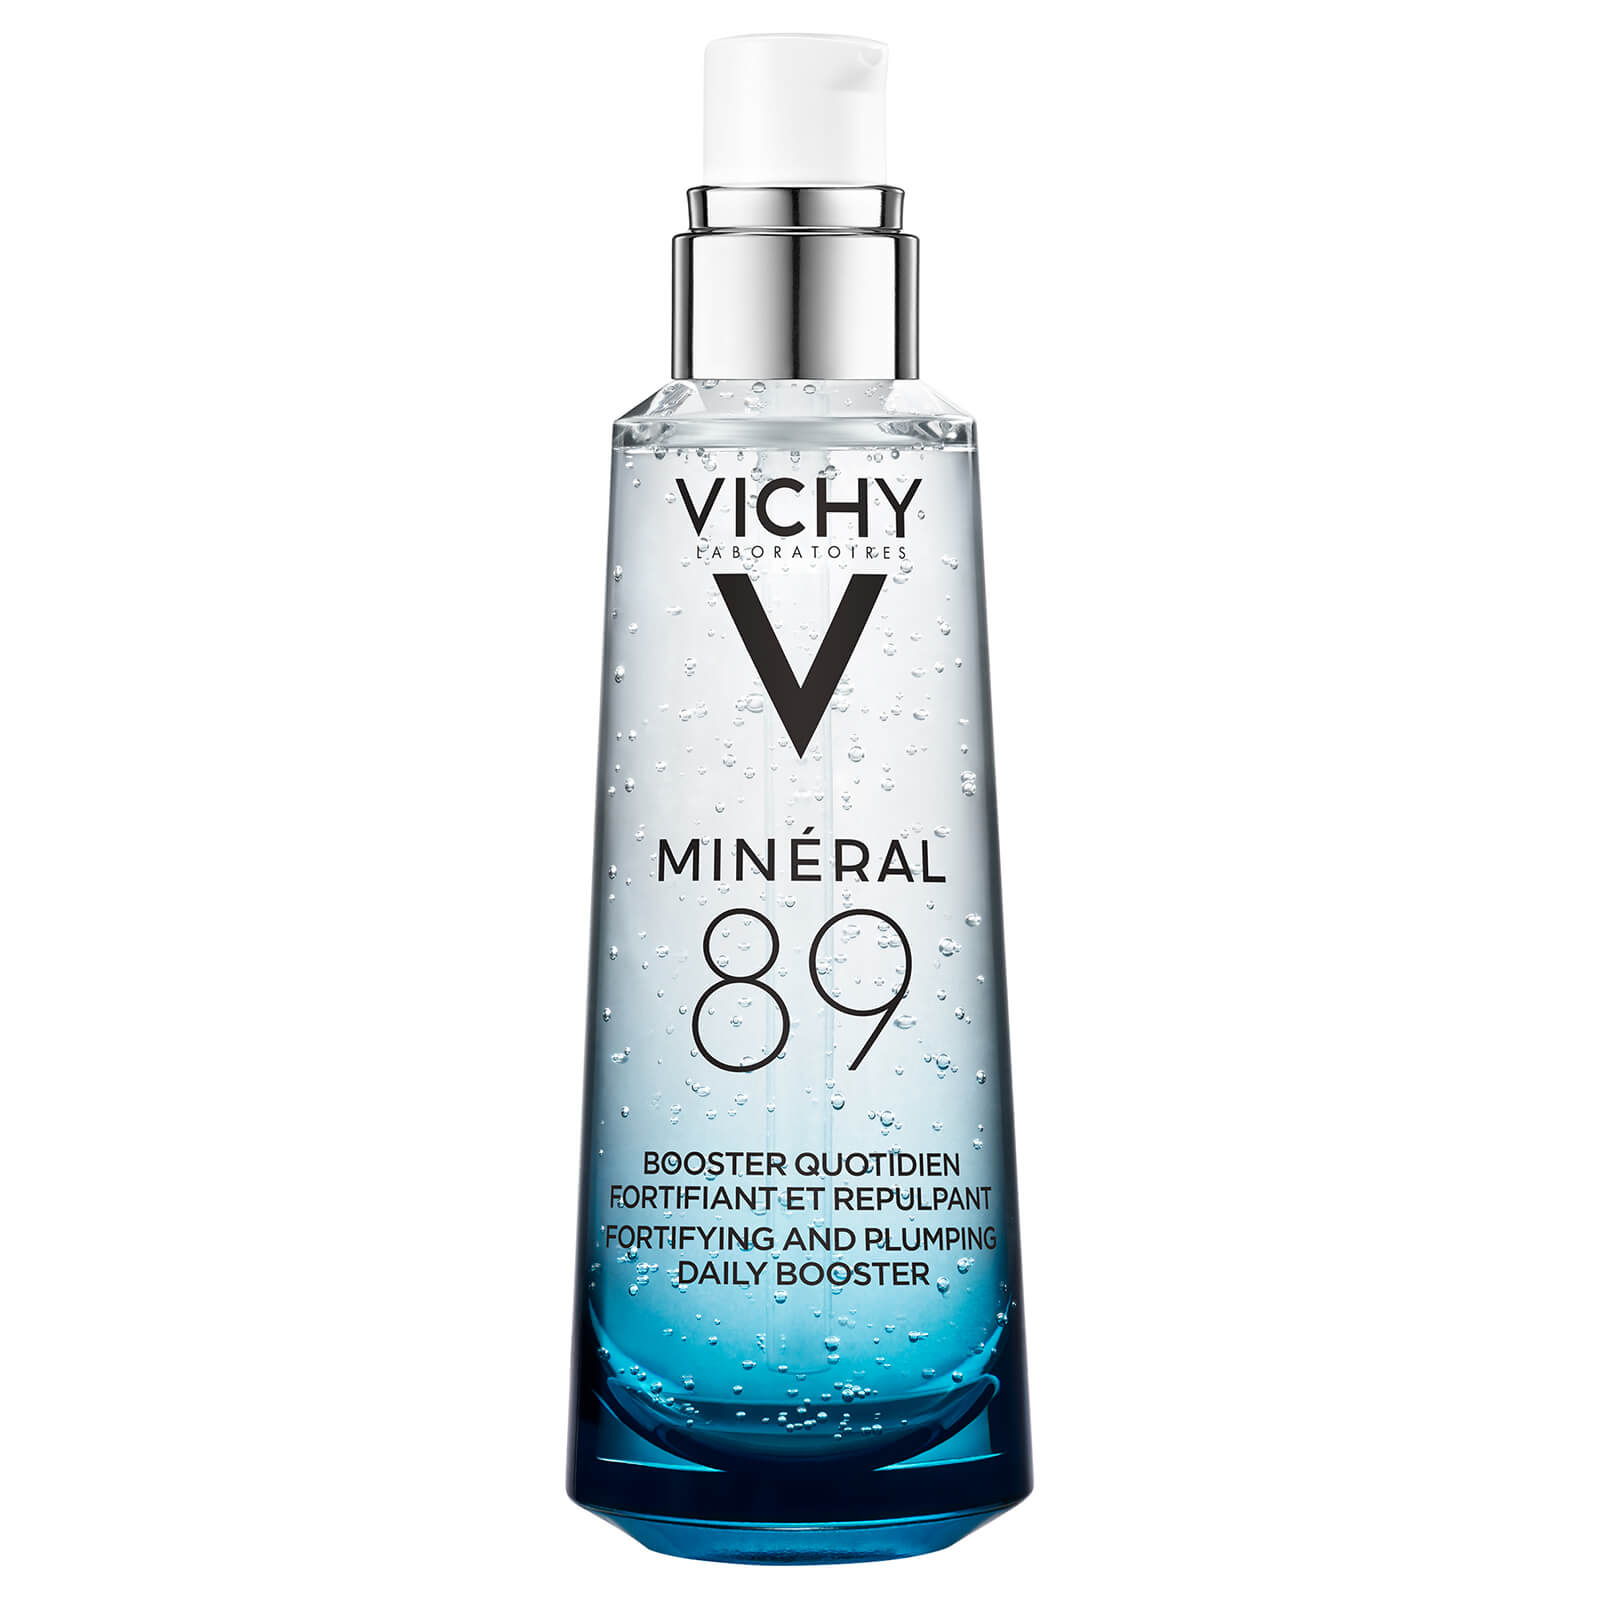 VICHY Minéral 89 Hyaluronic Acid Hydration Booster 75ml